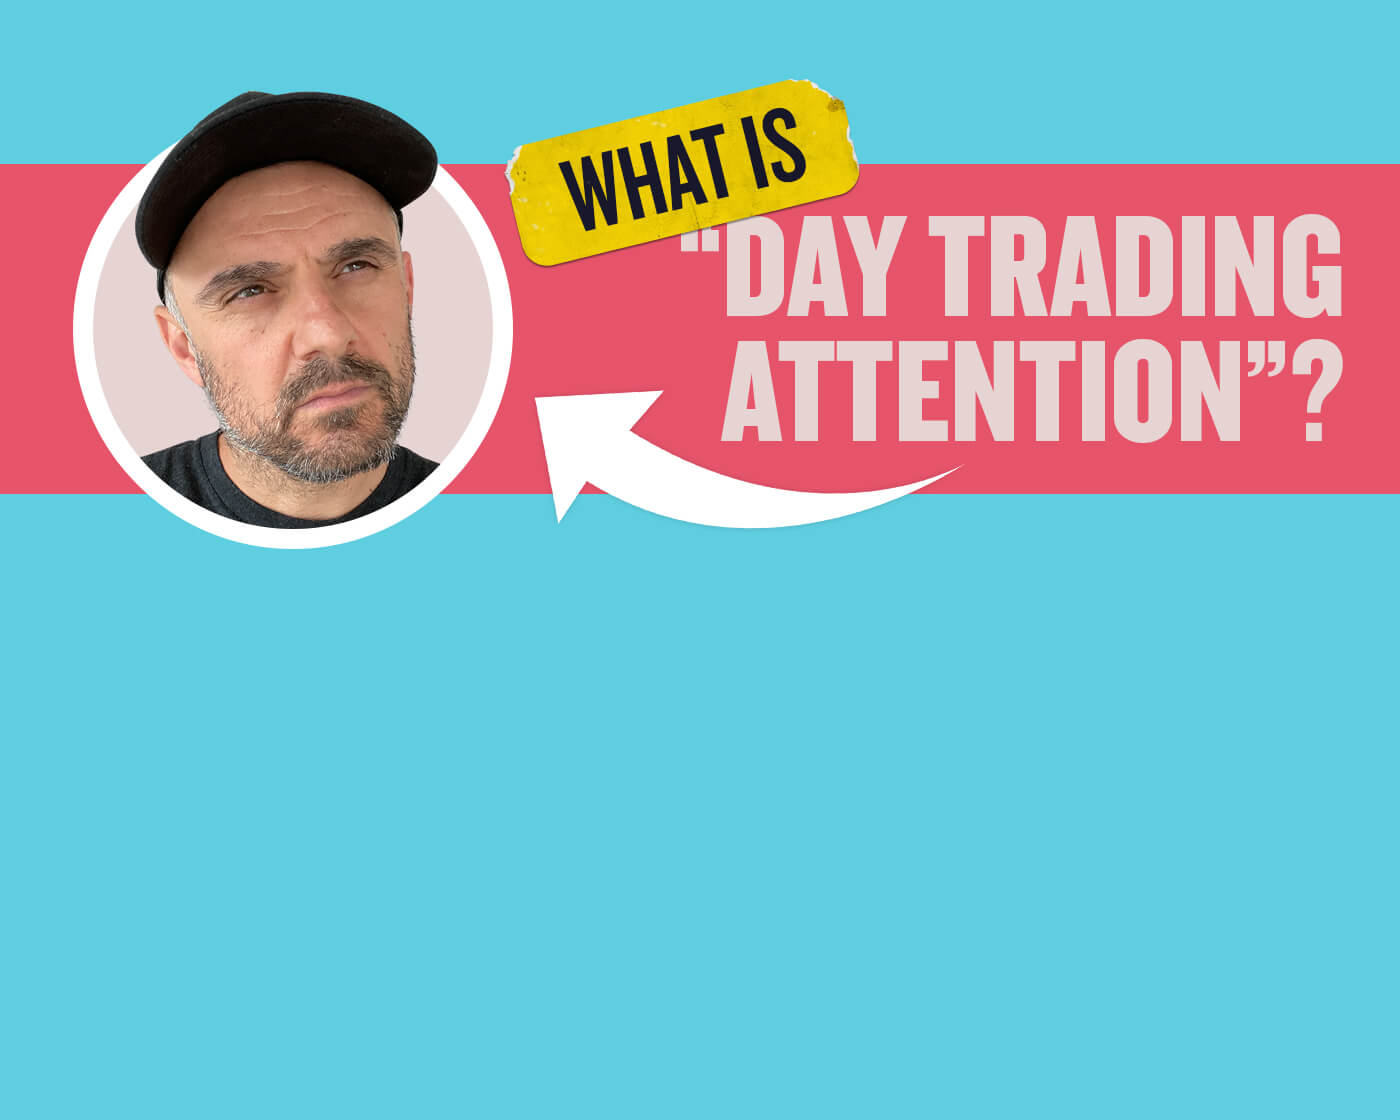 What Is “Day Trading Attention”?